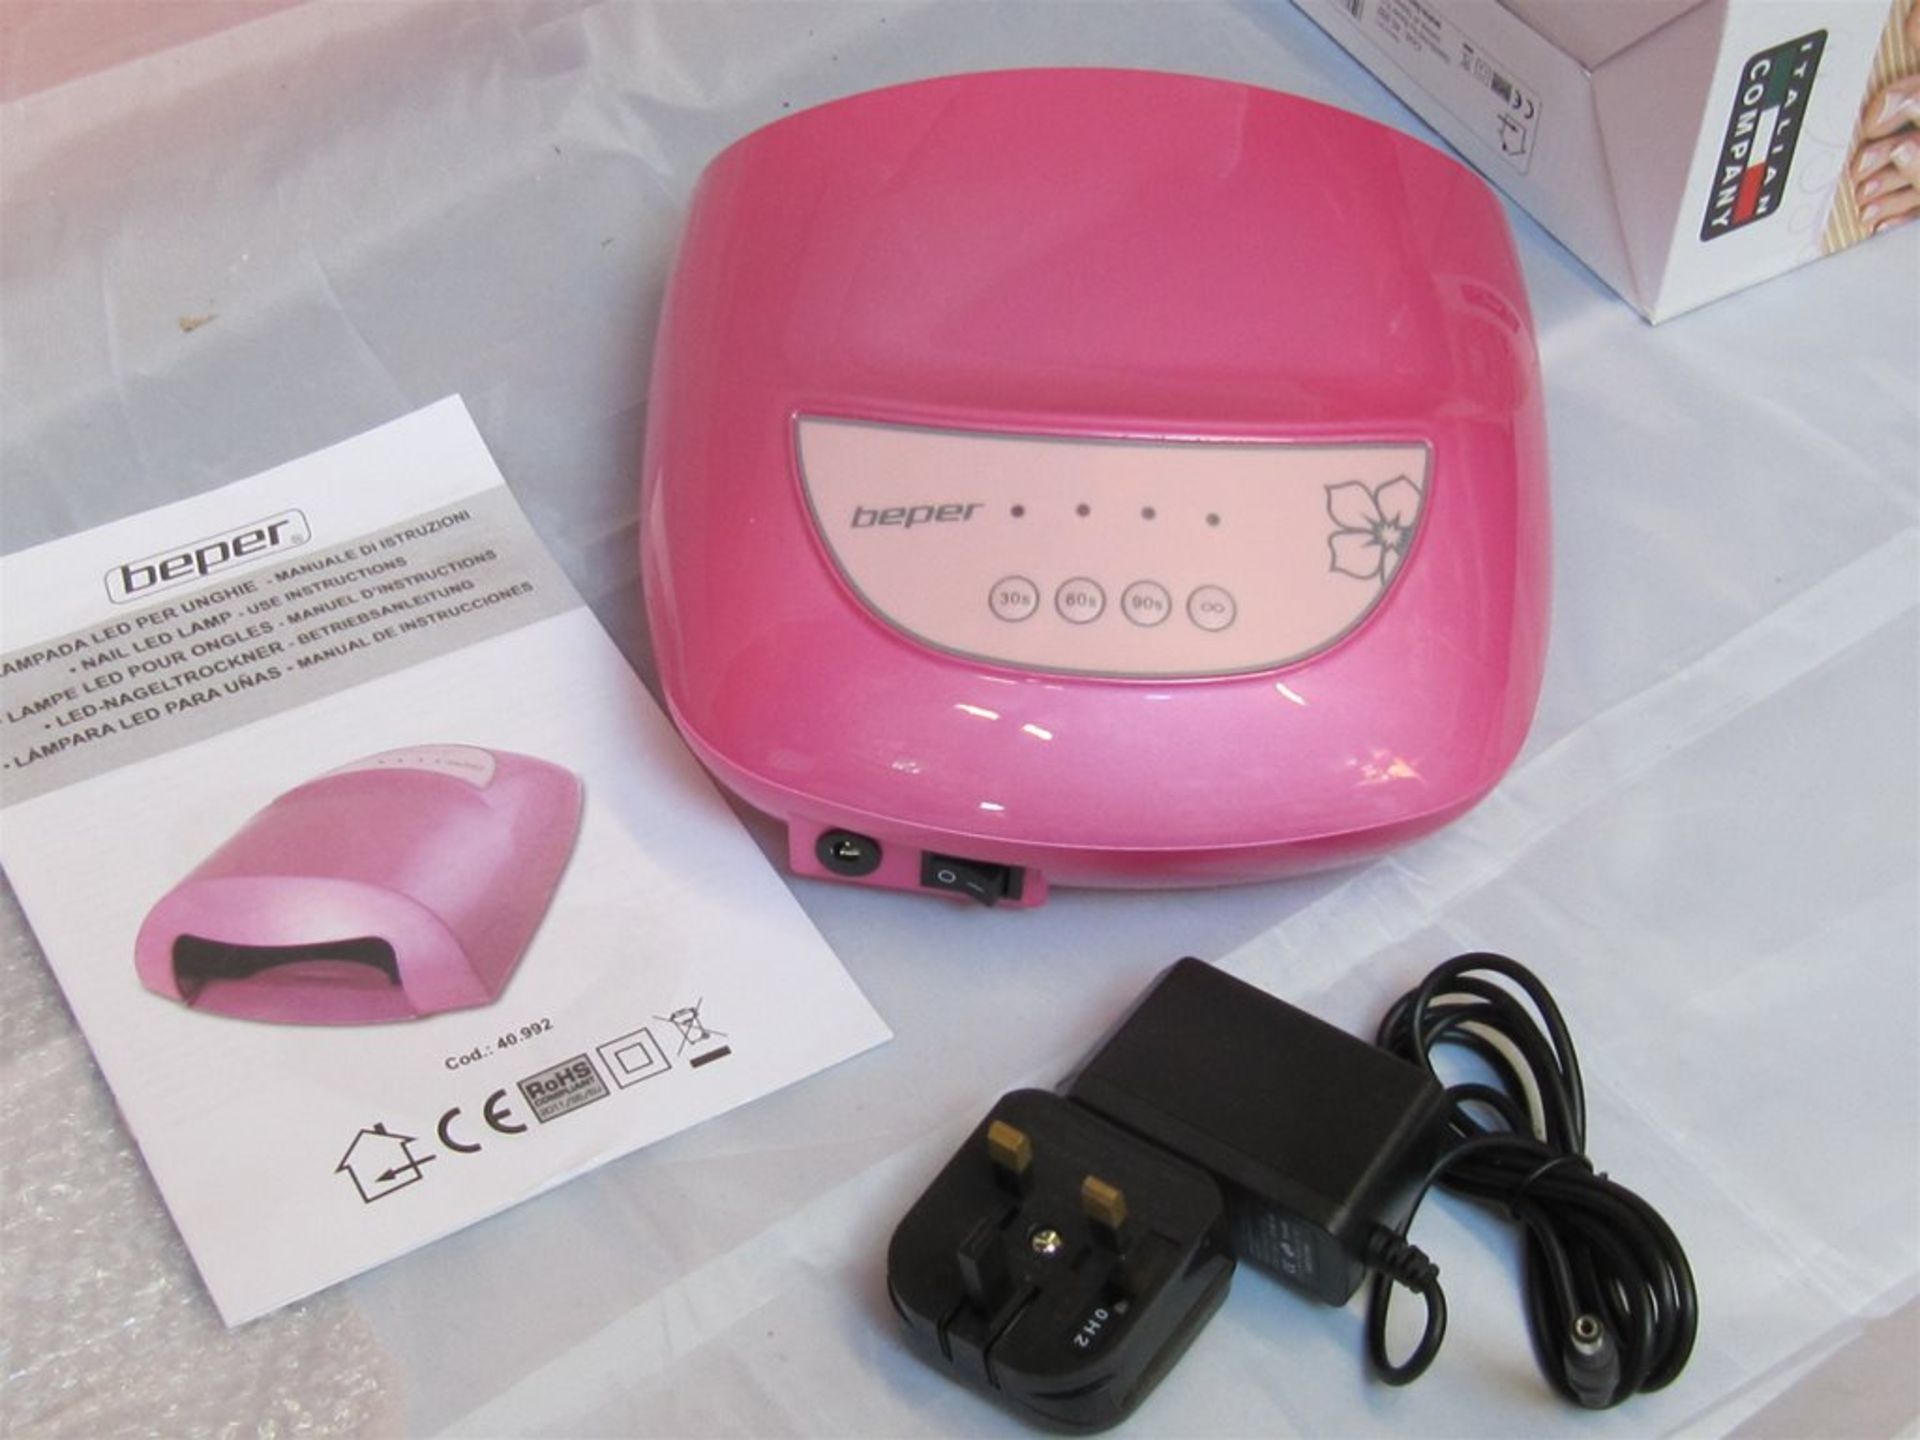 158) Beper LED Nail Lamp. 12w Rapid Dry Time. No vat on Hammer. - Image 3 of 4